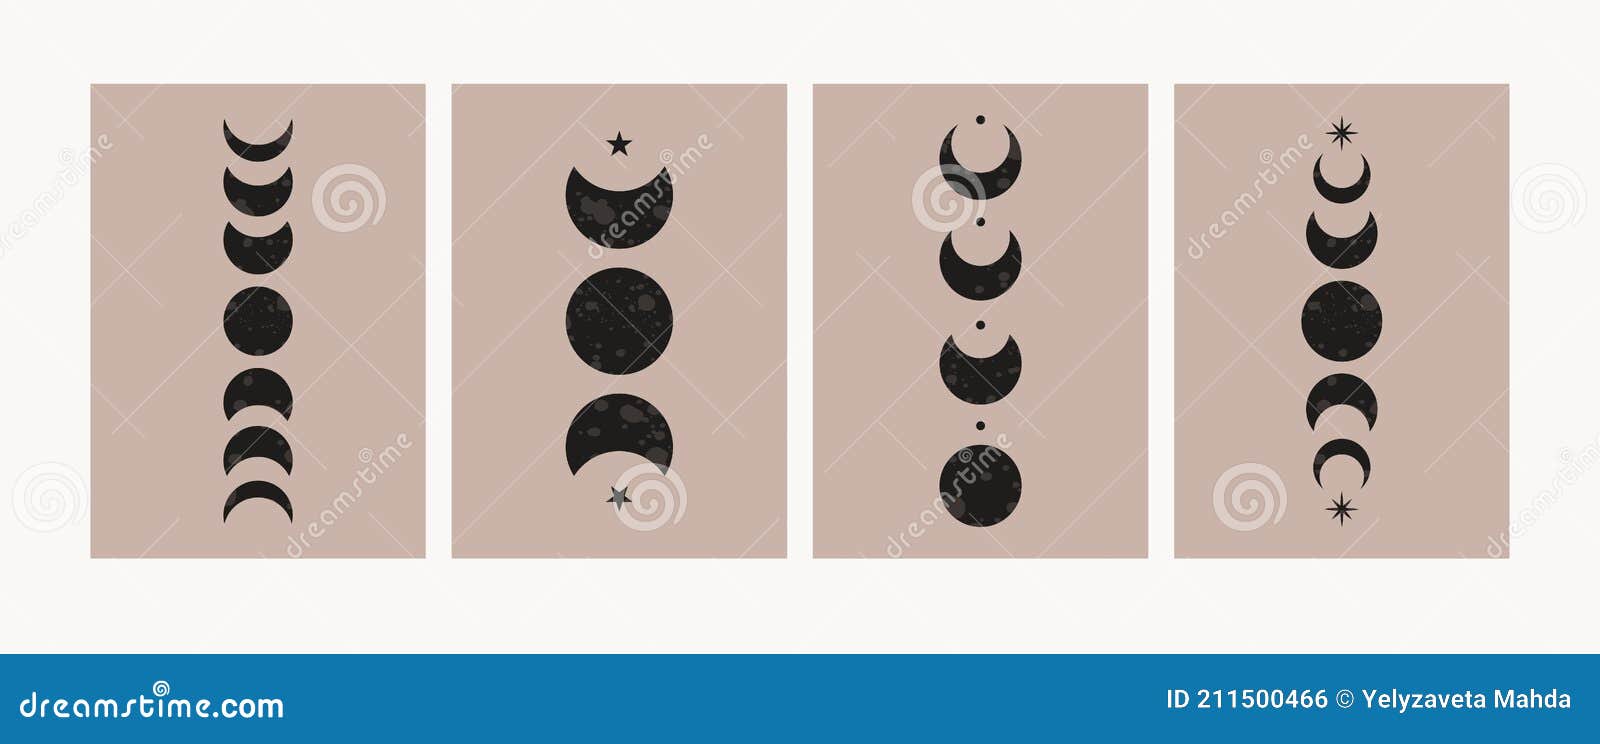 abstract moon phases posters. mid century lunar minimalist art decor, mystic contemporary print.  .